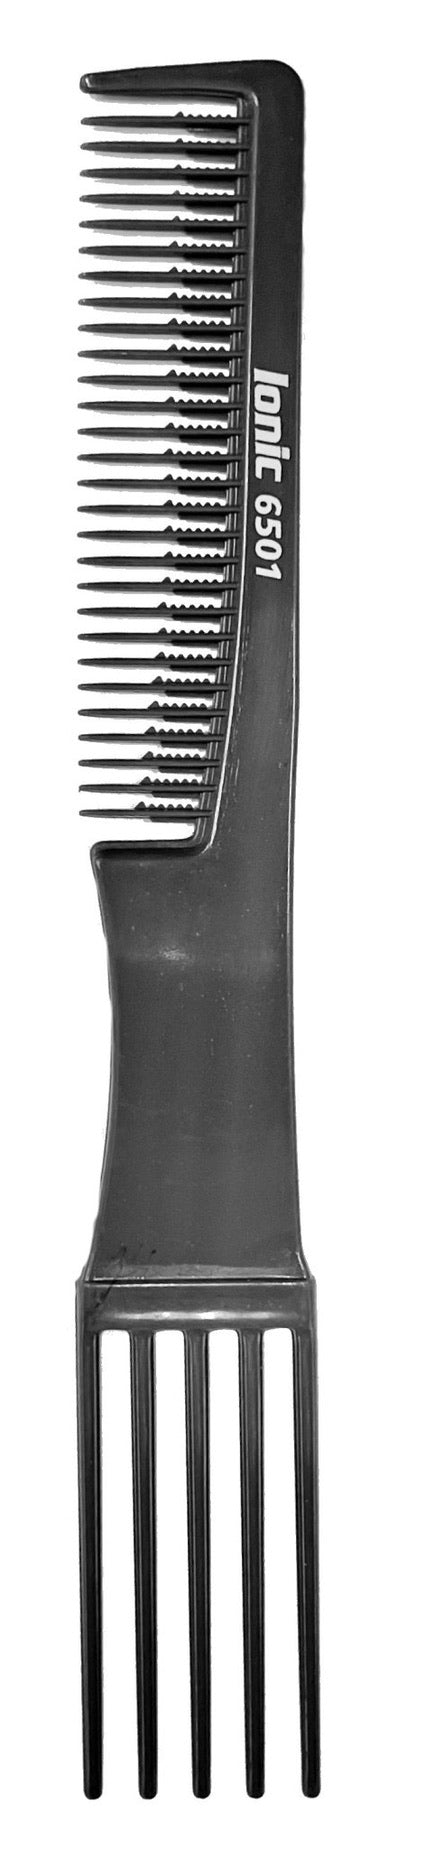 Ionic Comb with Fork Teath - Beauty Hair Products Ltd